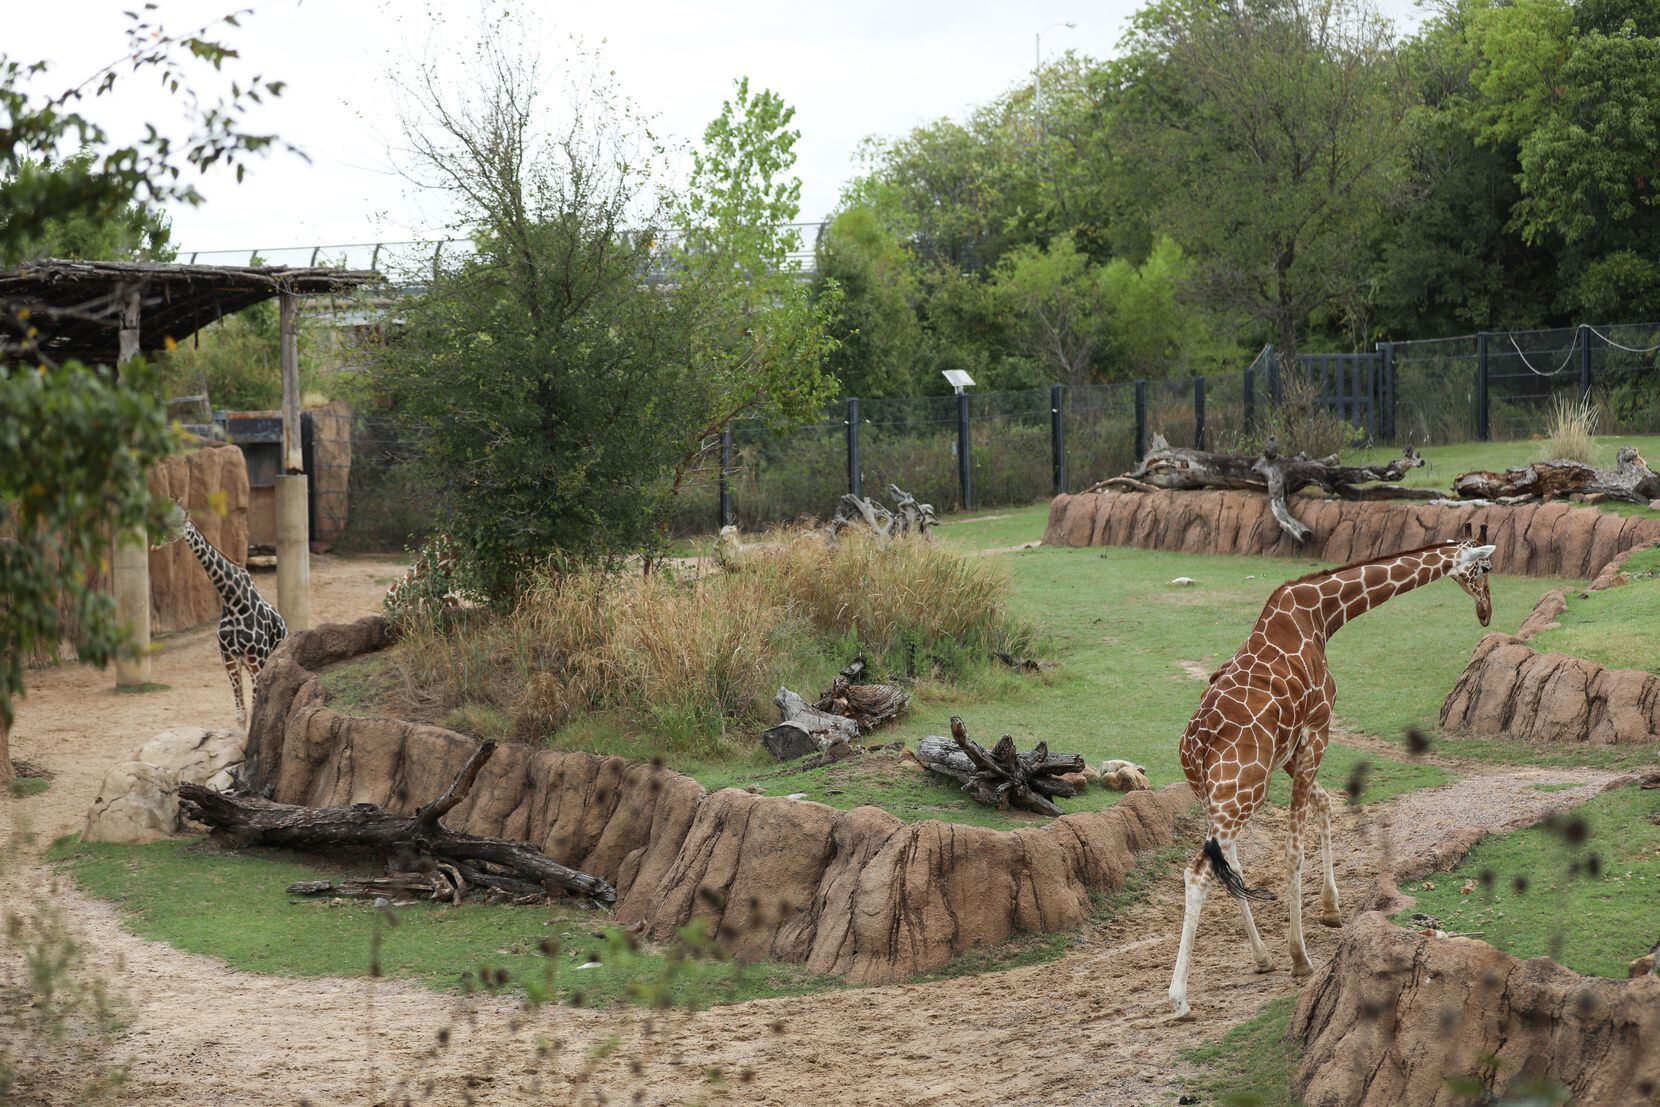 Two of the giraffes at the Dallas Zoo took a lap around their mixed habitat on Oct. 16, 2021. 